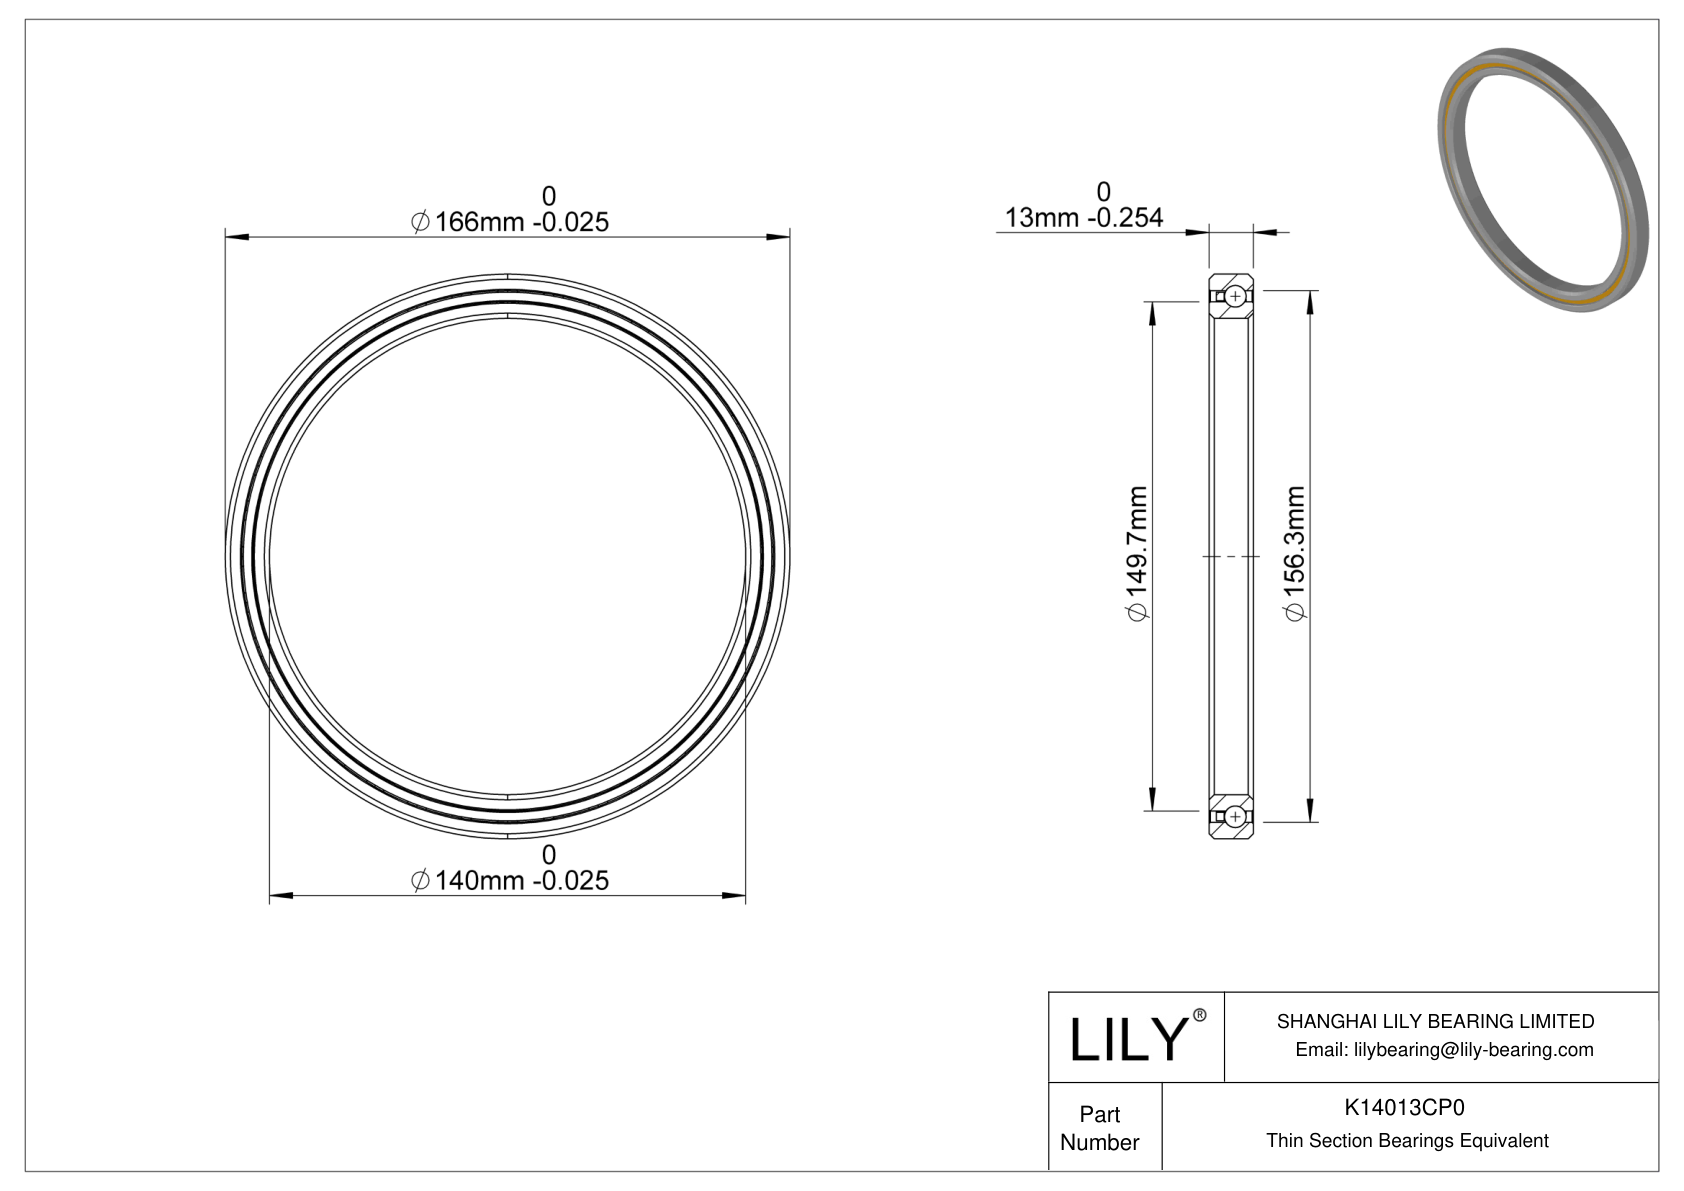 K14013CP0 Constant Section (CS) Bearings cad drawing